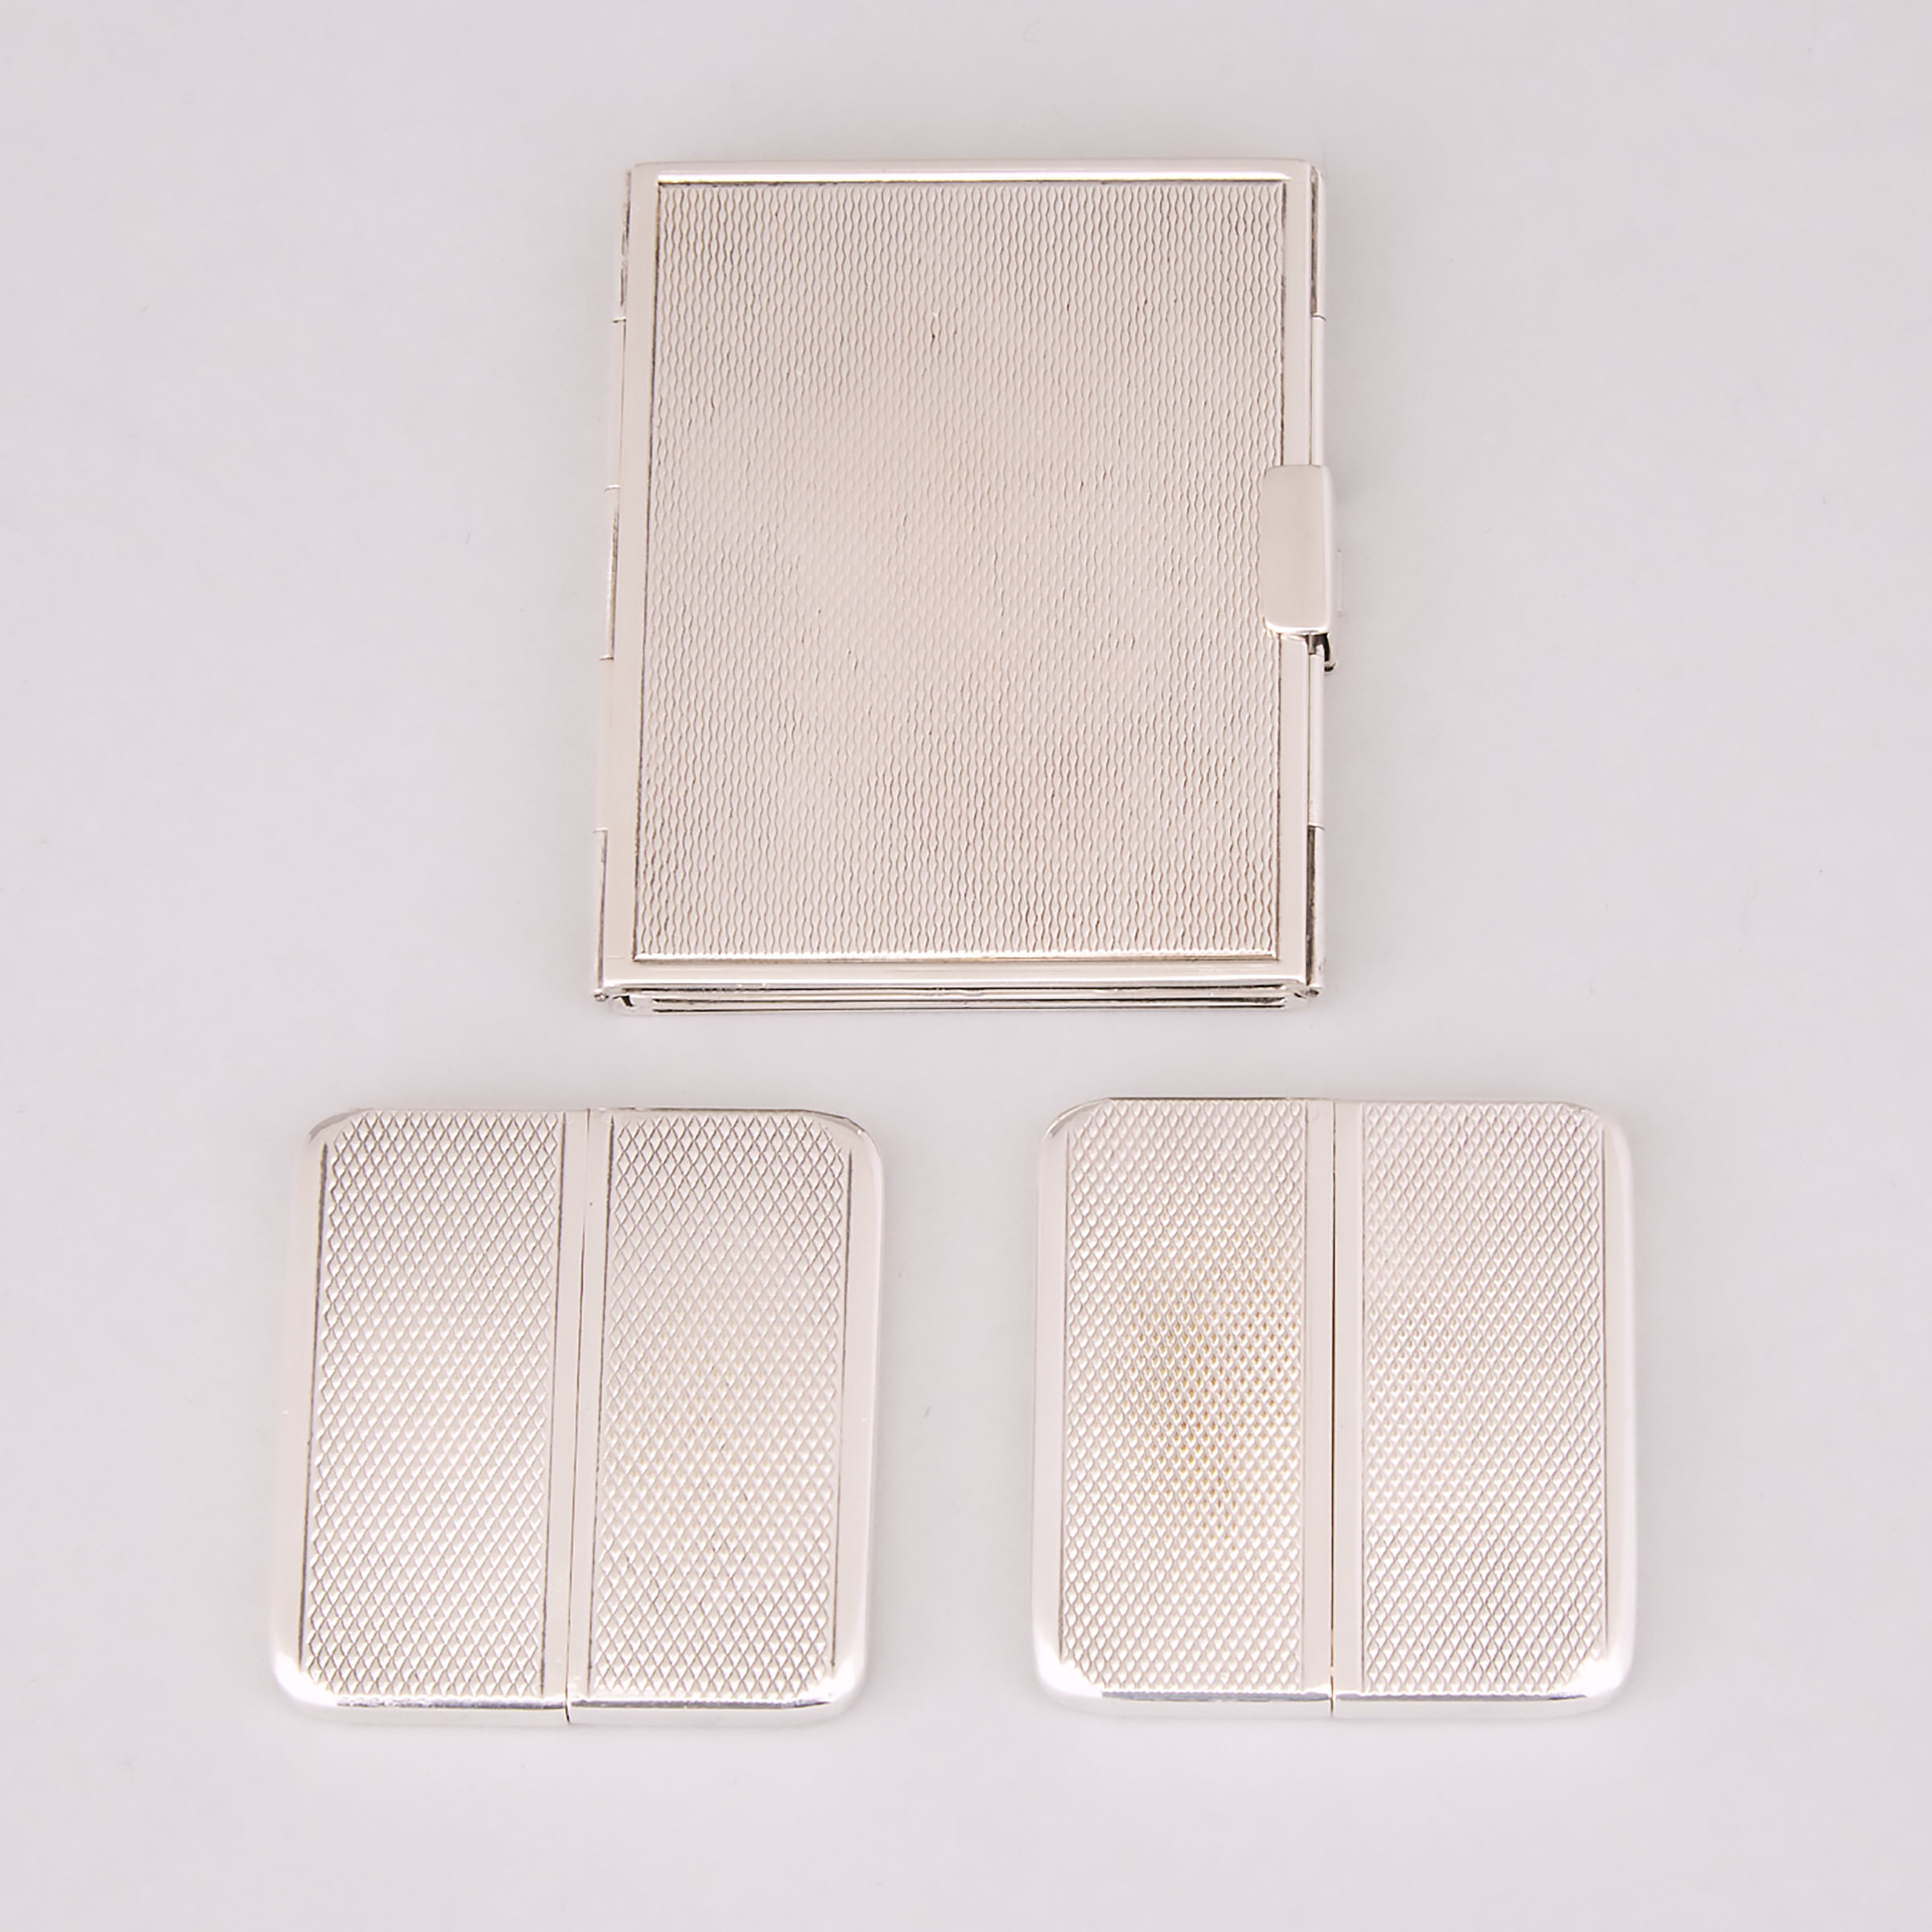 Continental Silver Triptych Pocket Photograph Frame and Two French Silver Plated Frames, 20th century